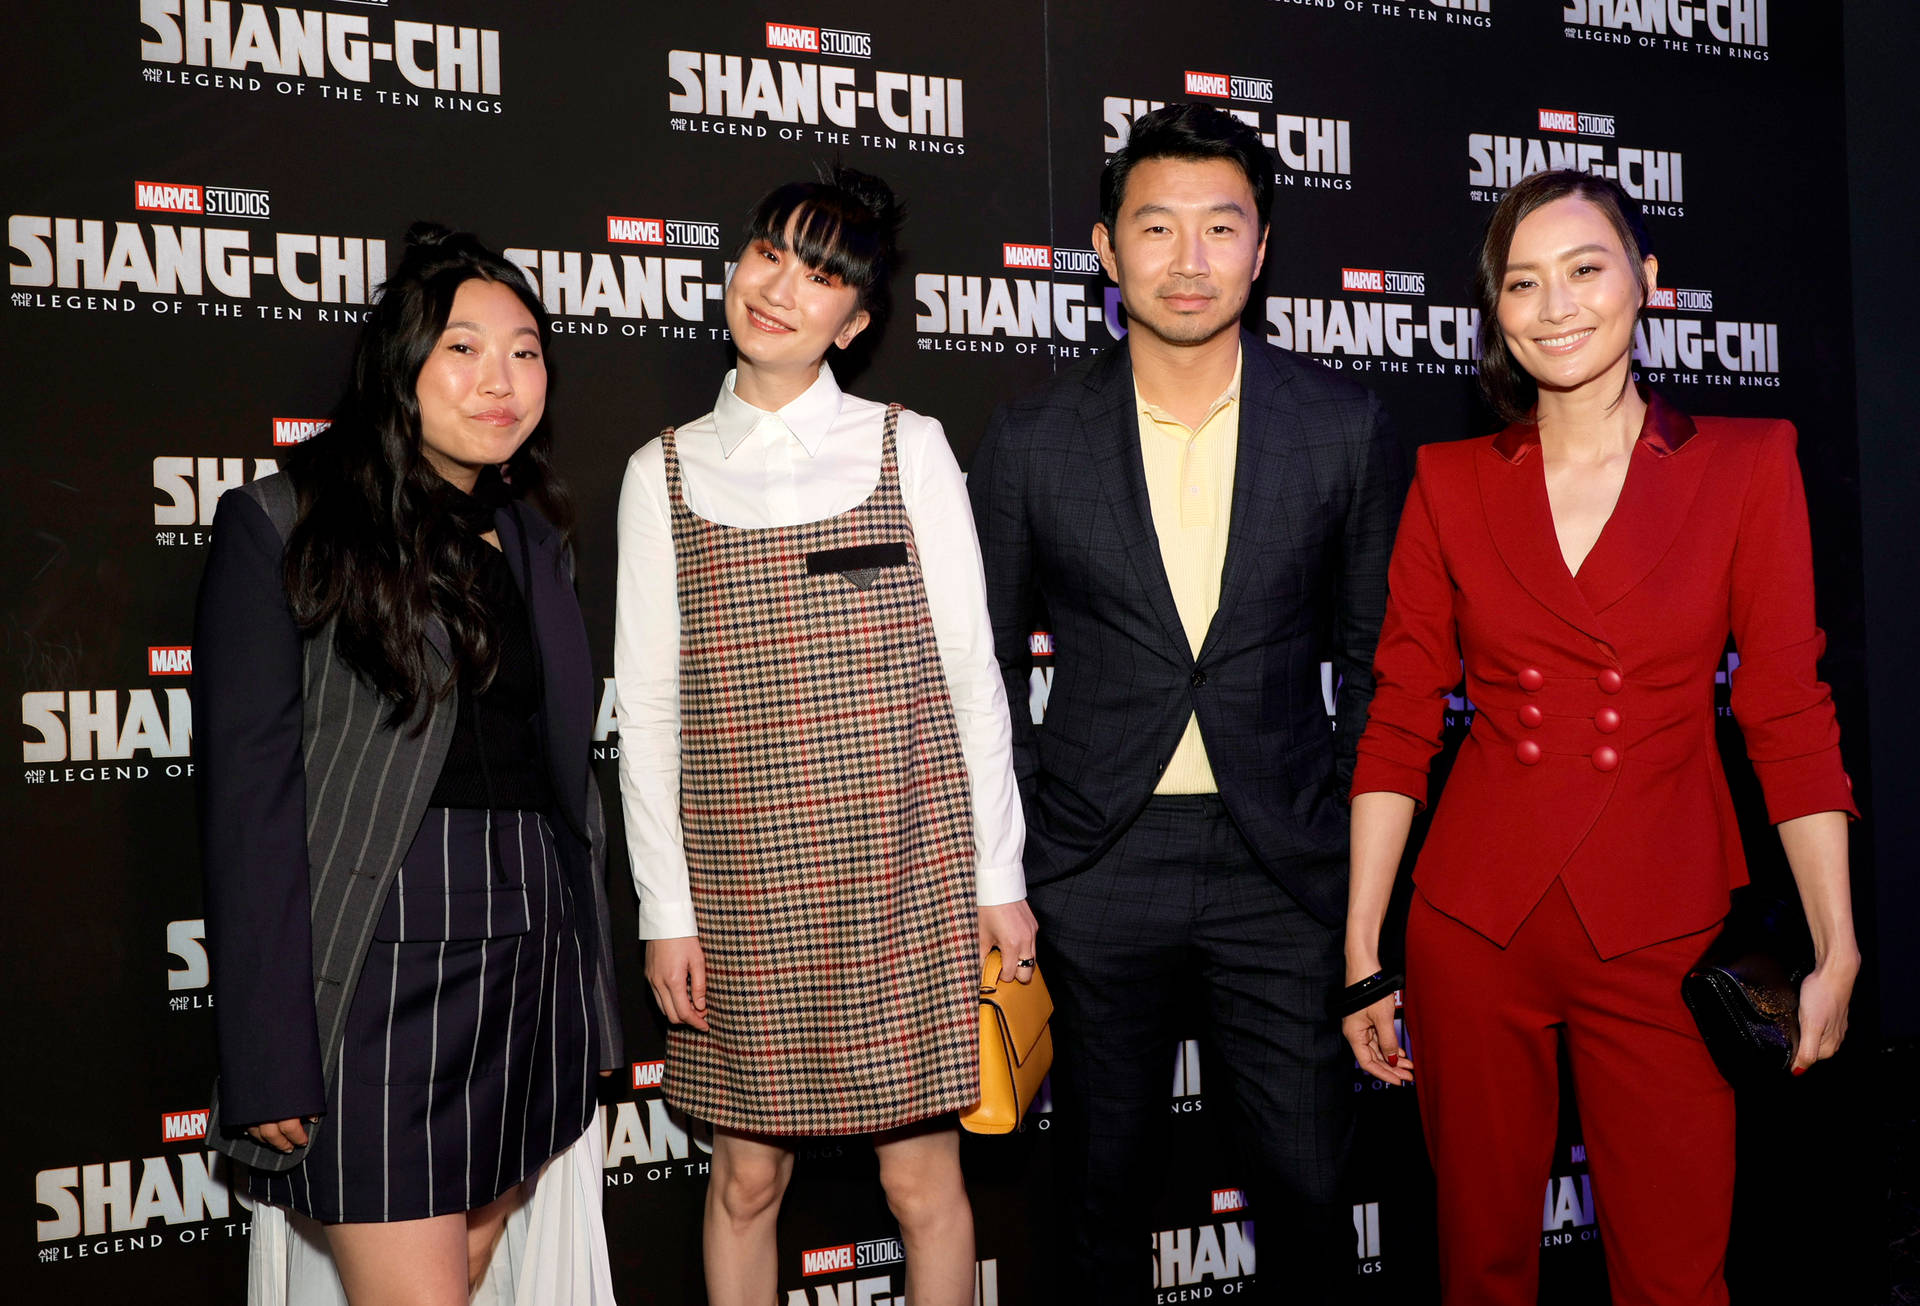 Shang-chi Red Carpet Premiere Background